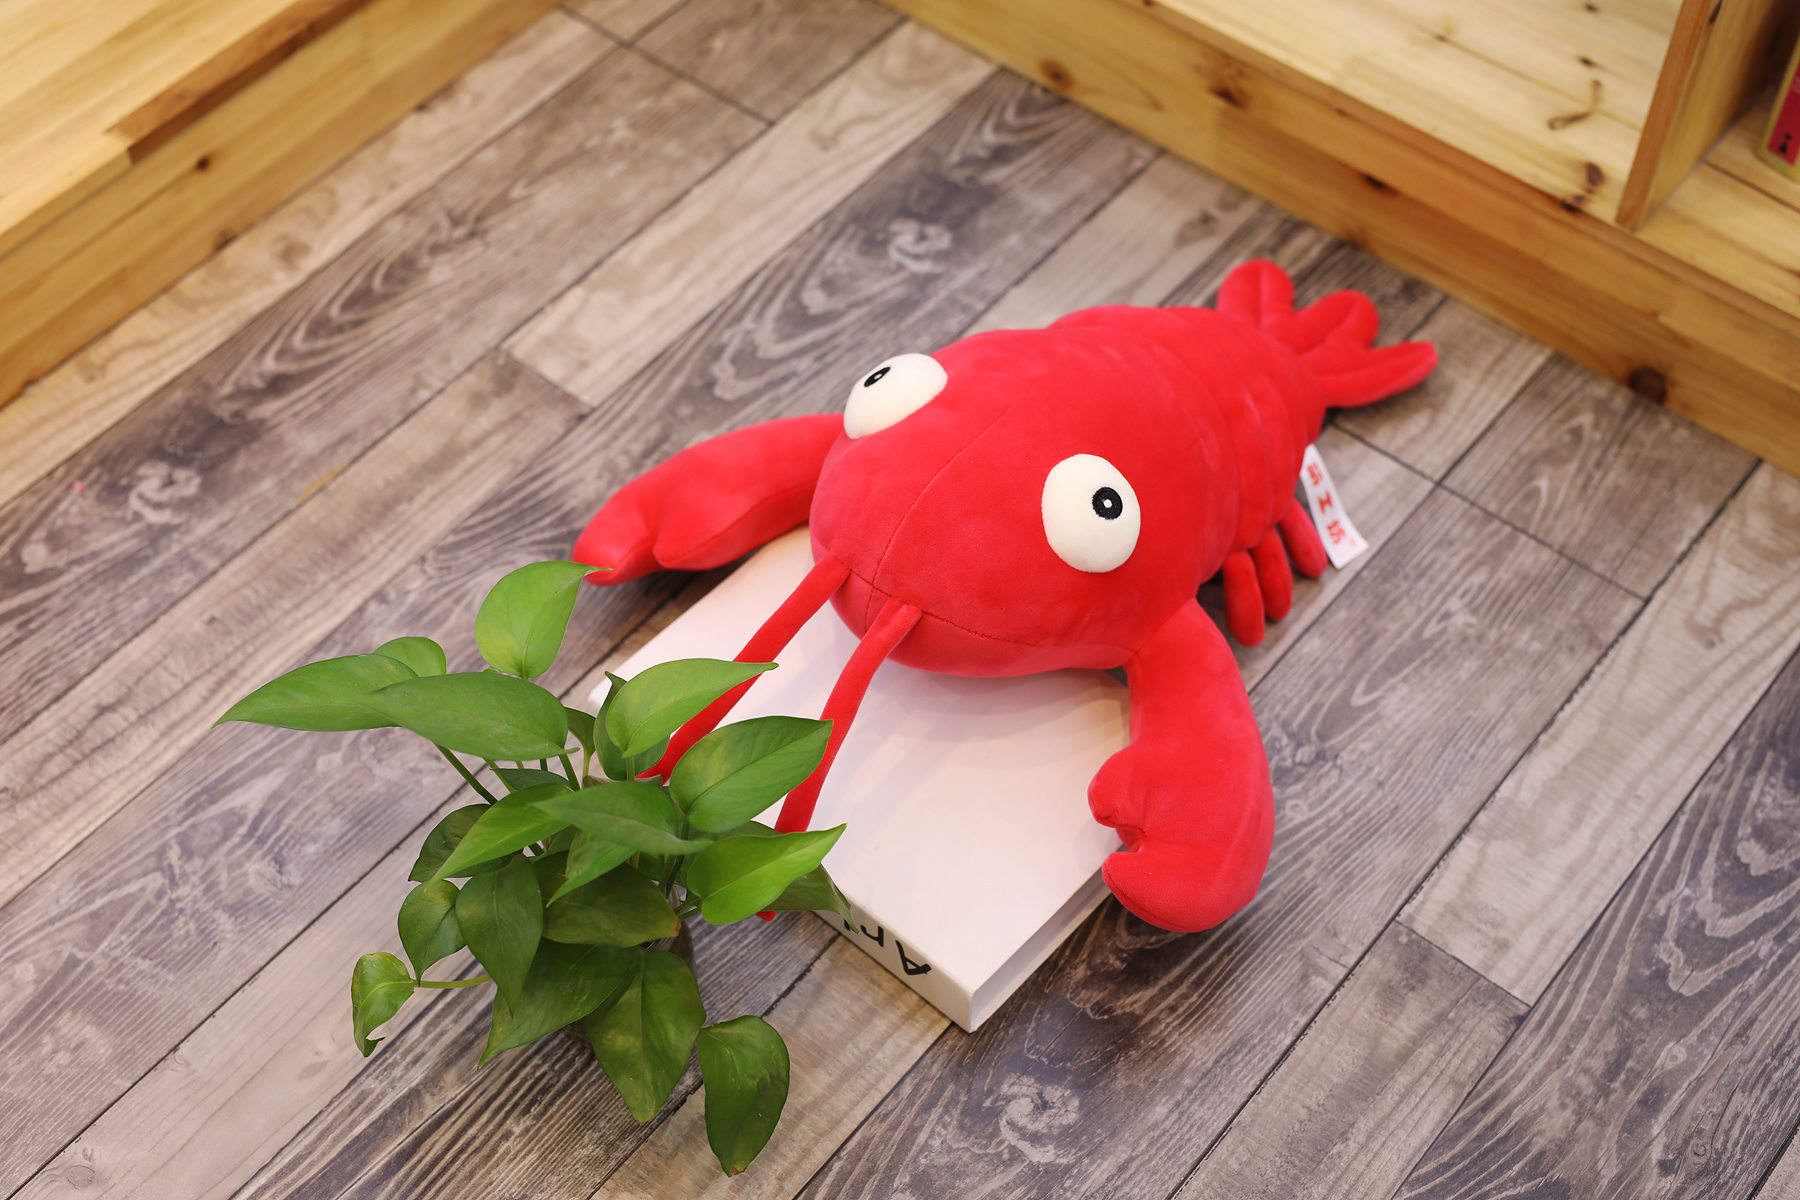 New Arrival Big Lobster Plush Toy for Baby Kids Playmate Soft Stuffed Animal Lobster Plush Toy Gifts for Kids Birthday